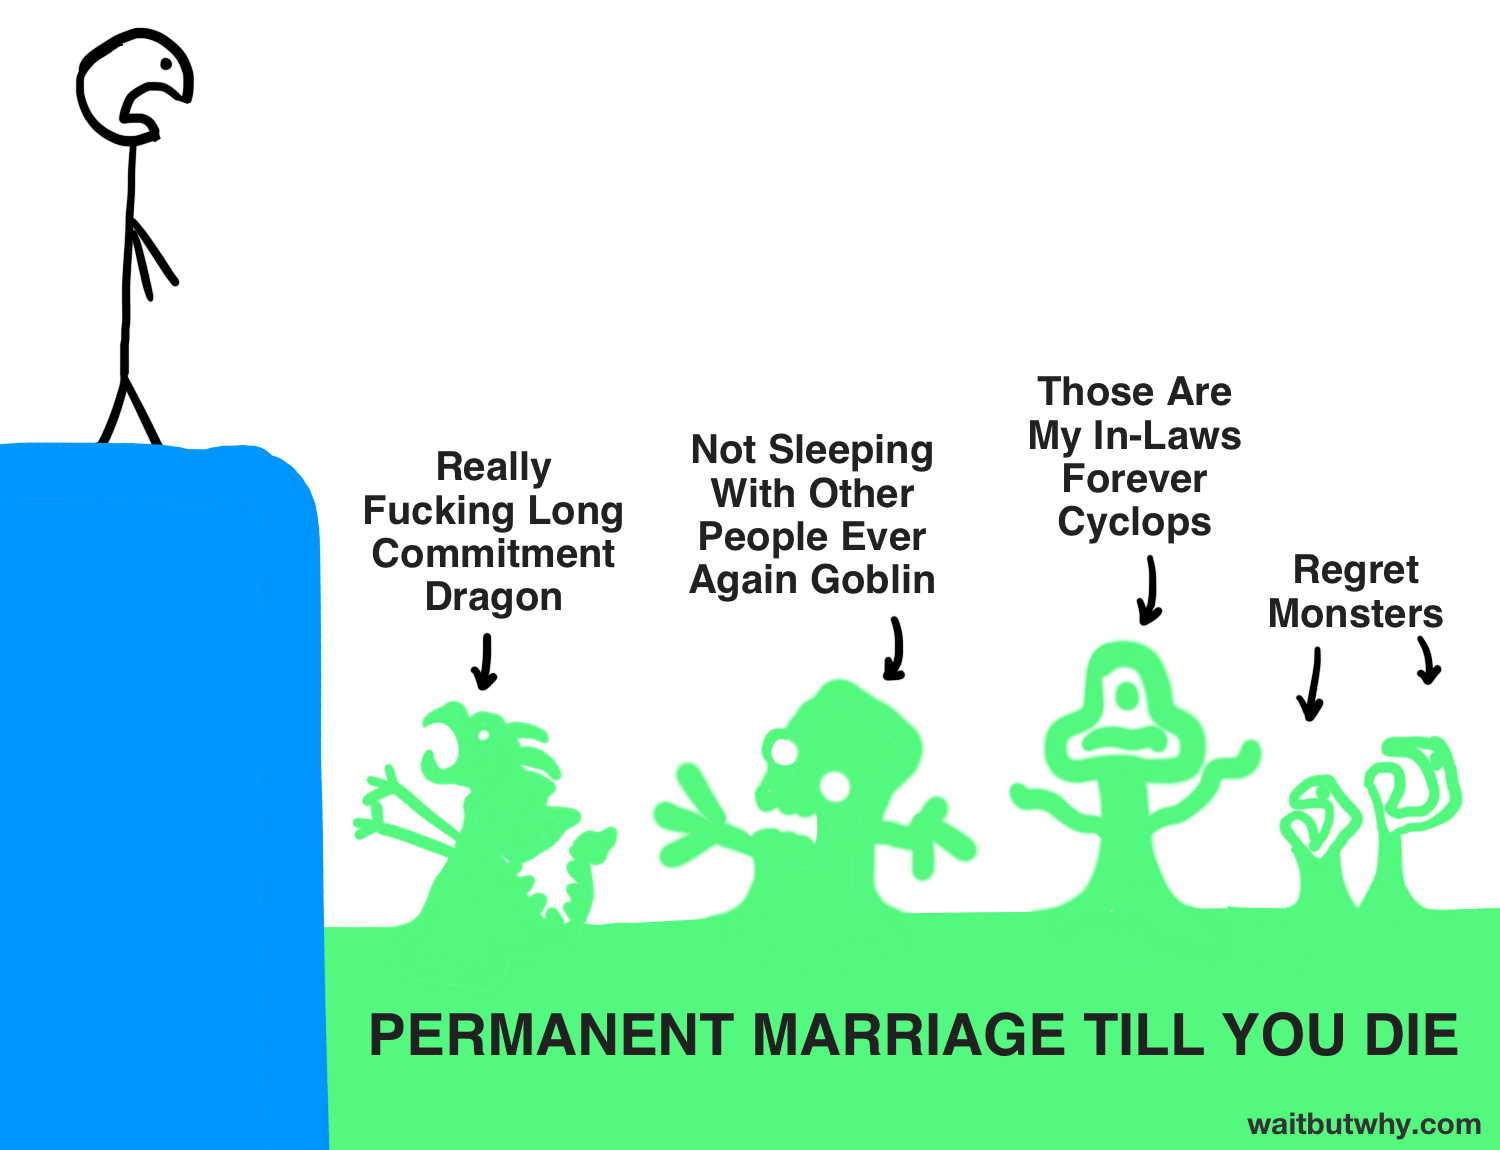 fear monsters on the "permanent marriage till you die" side